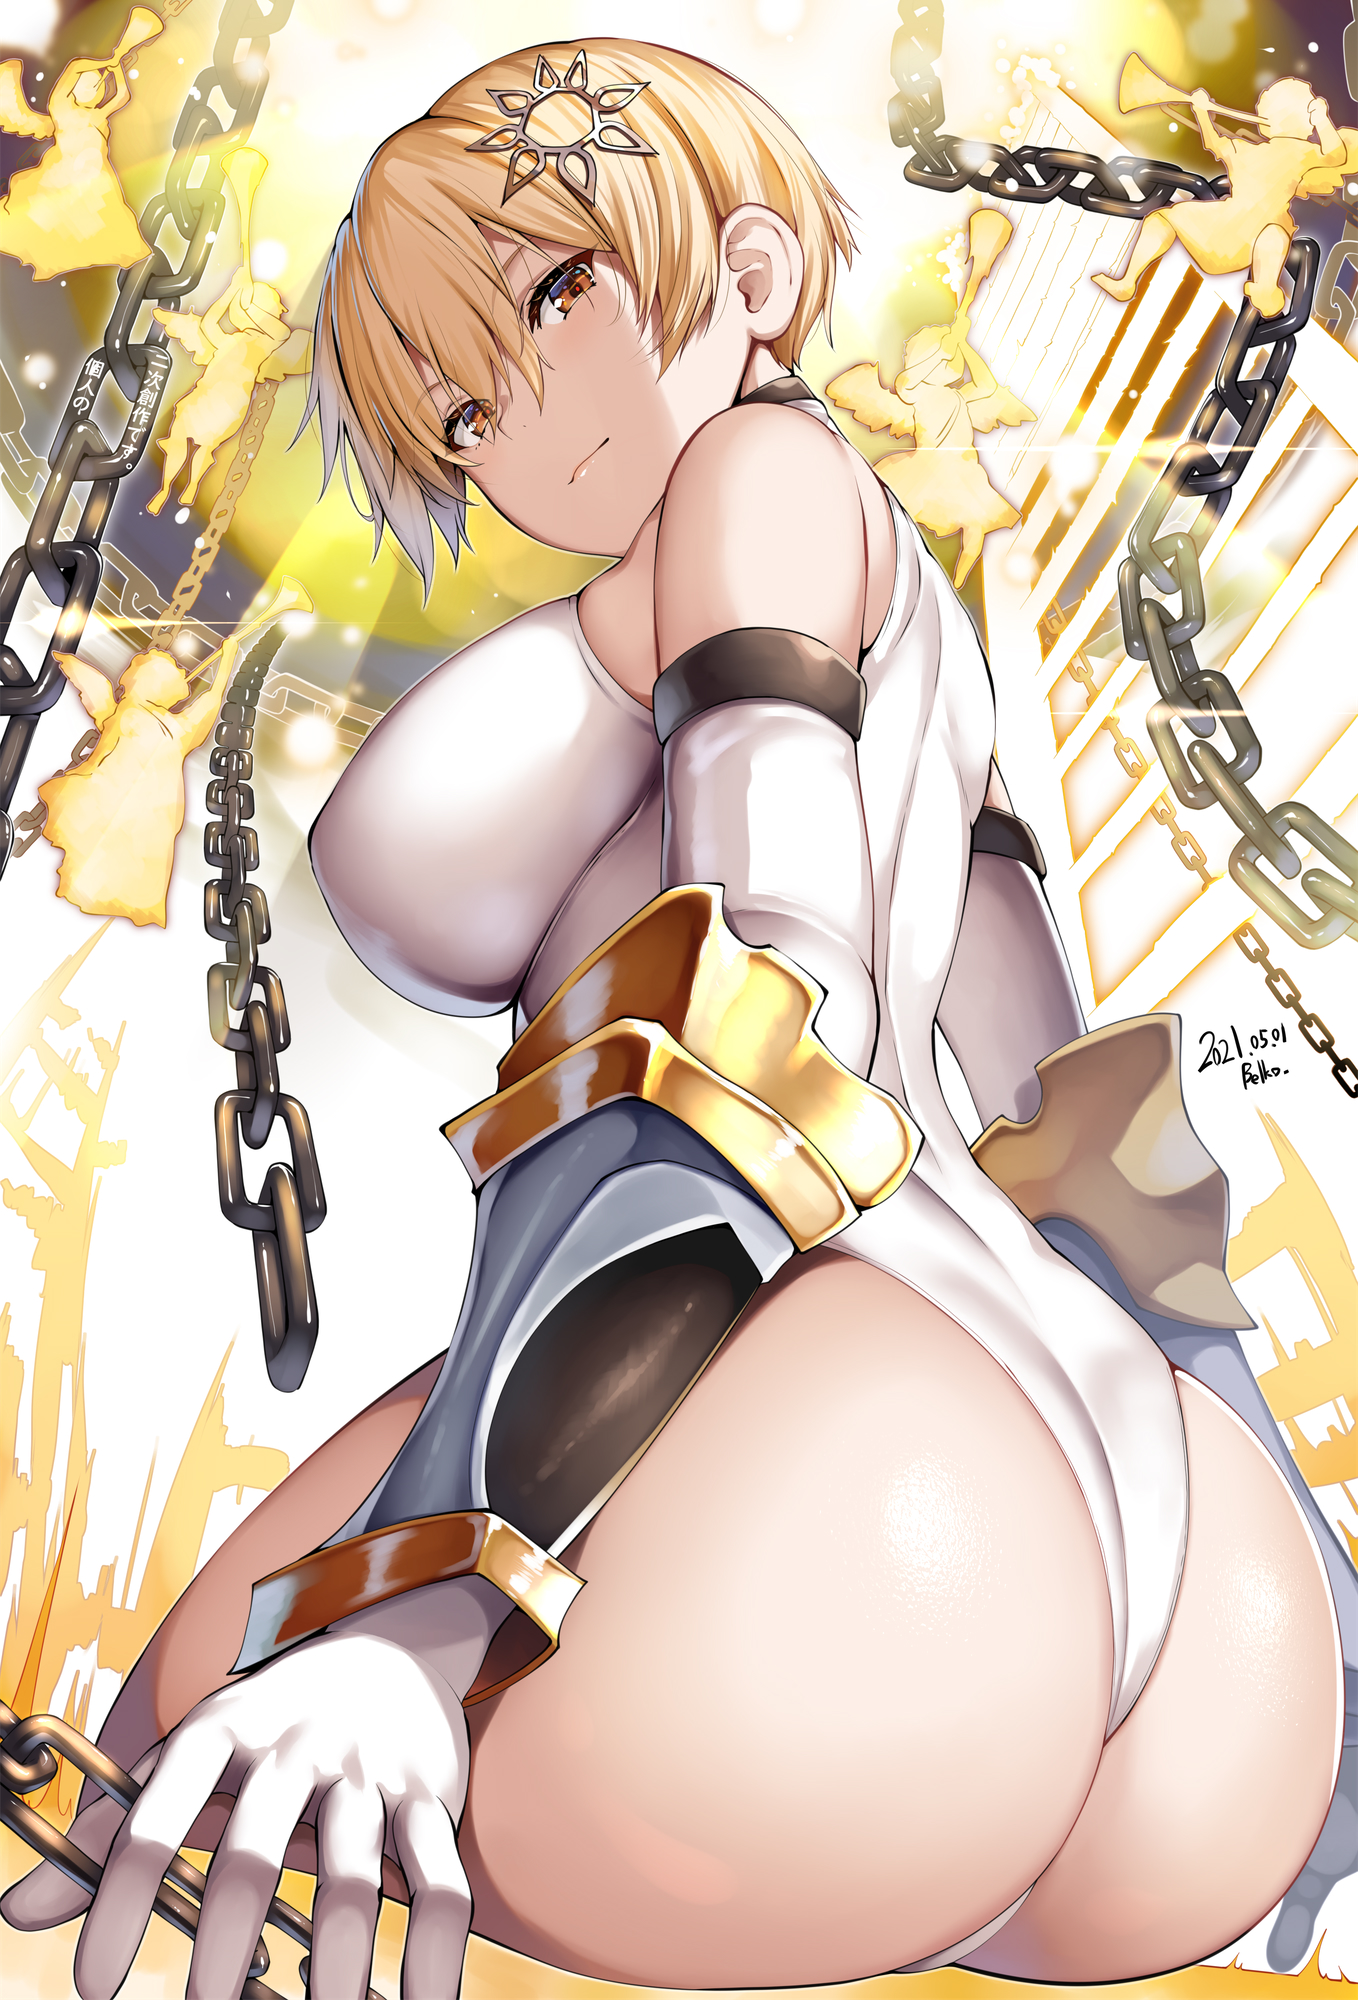 Anime 1358x2000 anime anime girls ass blonde short hair big boobs glutes leotard artwork Lolicept looking below low-angle looking back smiling